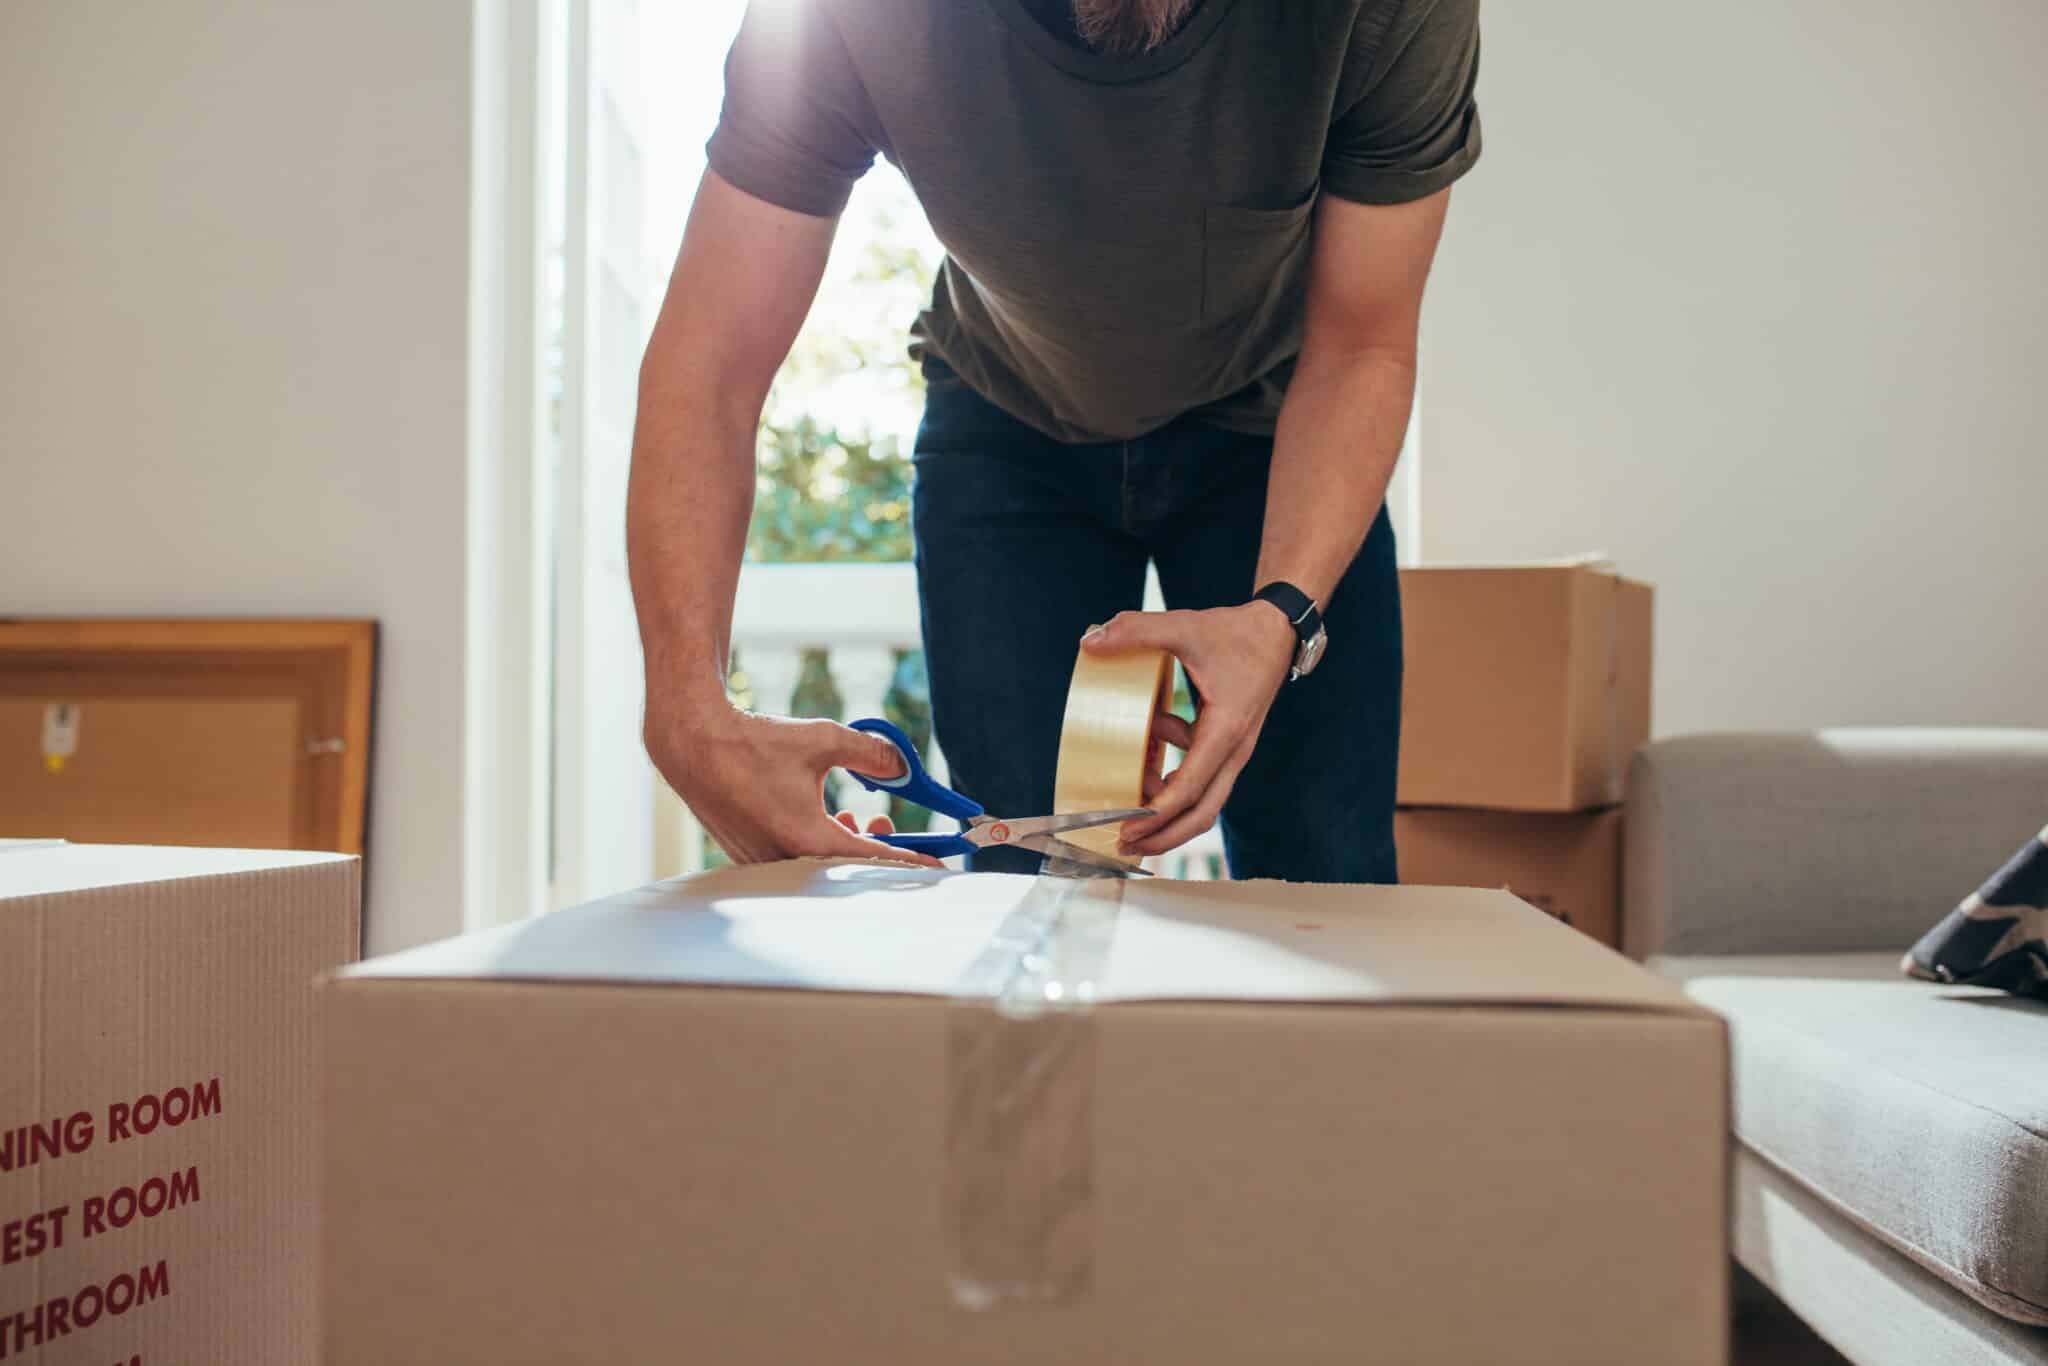 Close up of a man applying adhesive tape on a packing box. Man cutting adhesive tap using scissors after sealing the box.